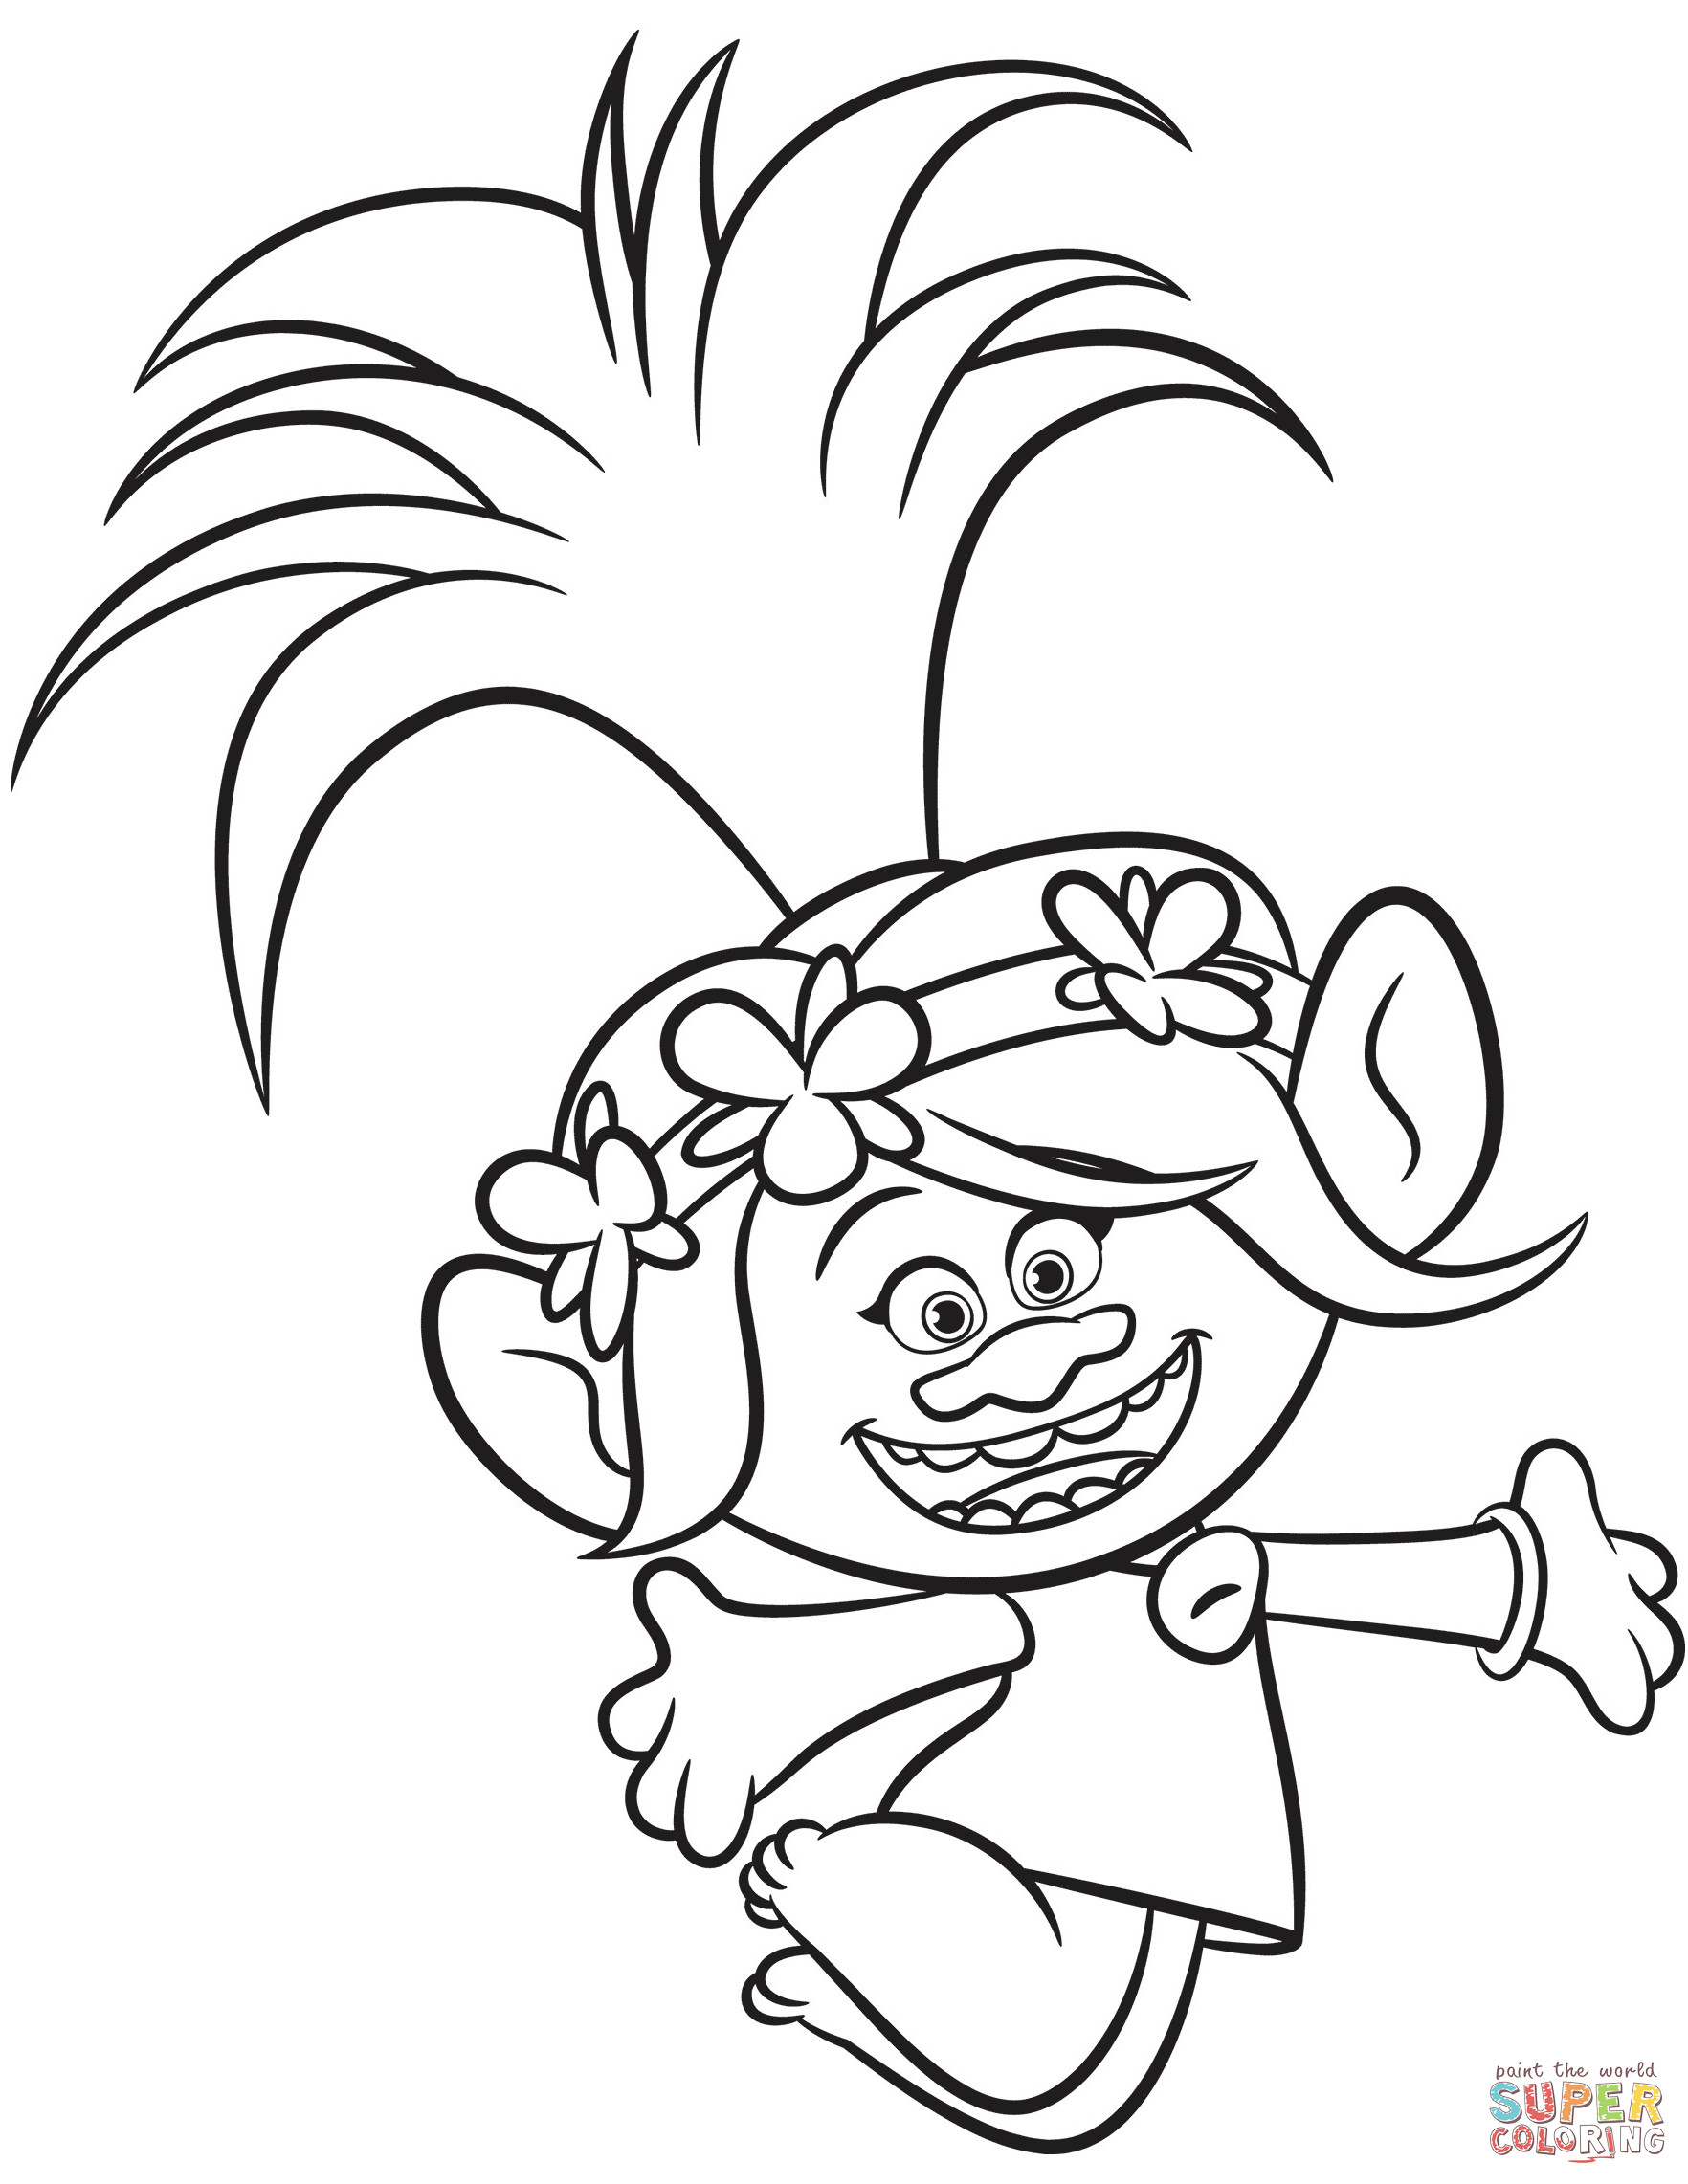 Free Printable Trolls Coloring Pages
 Poppy from Trolls coloring page